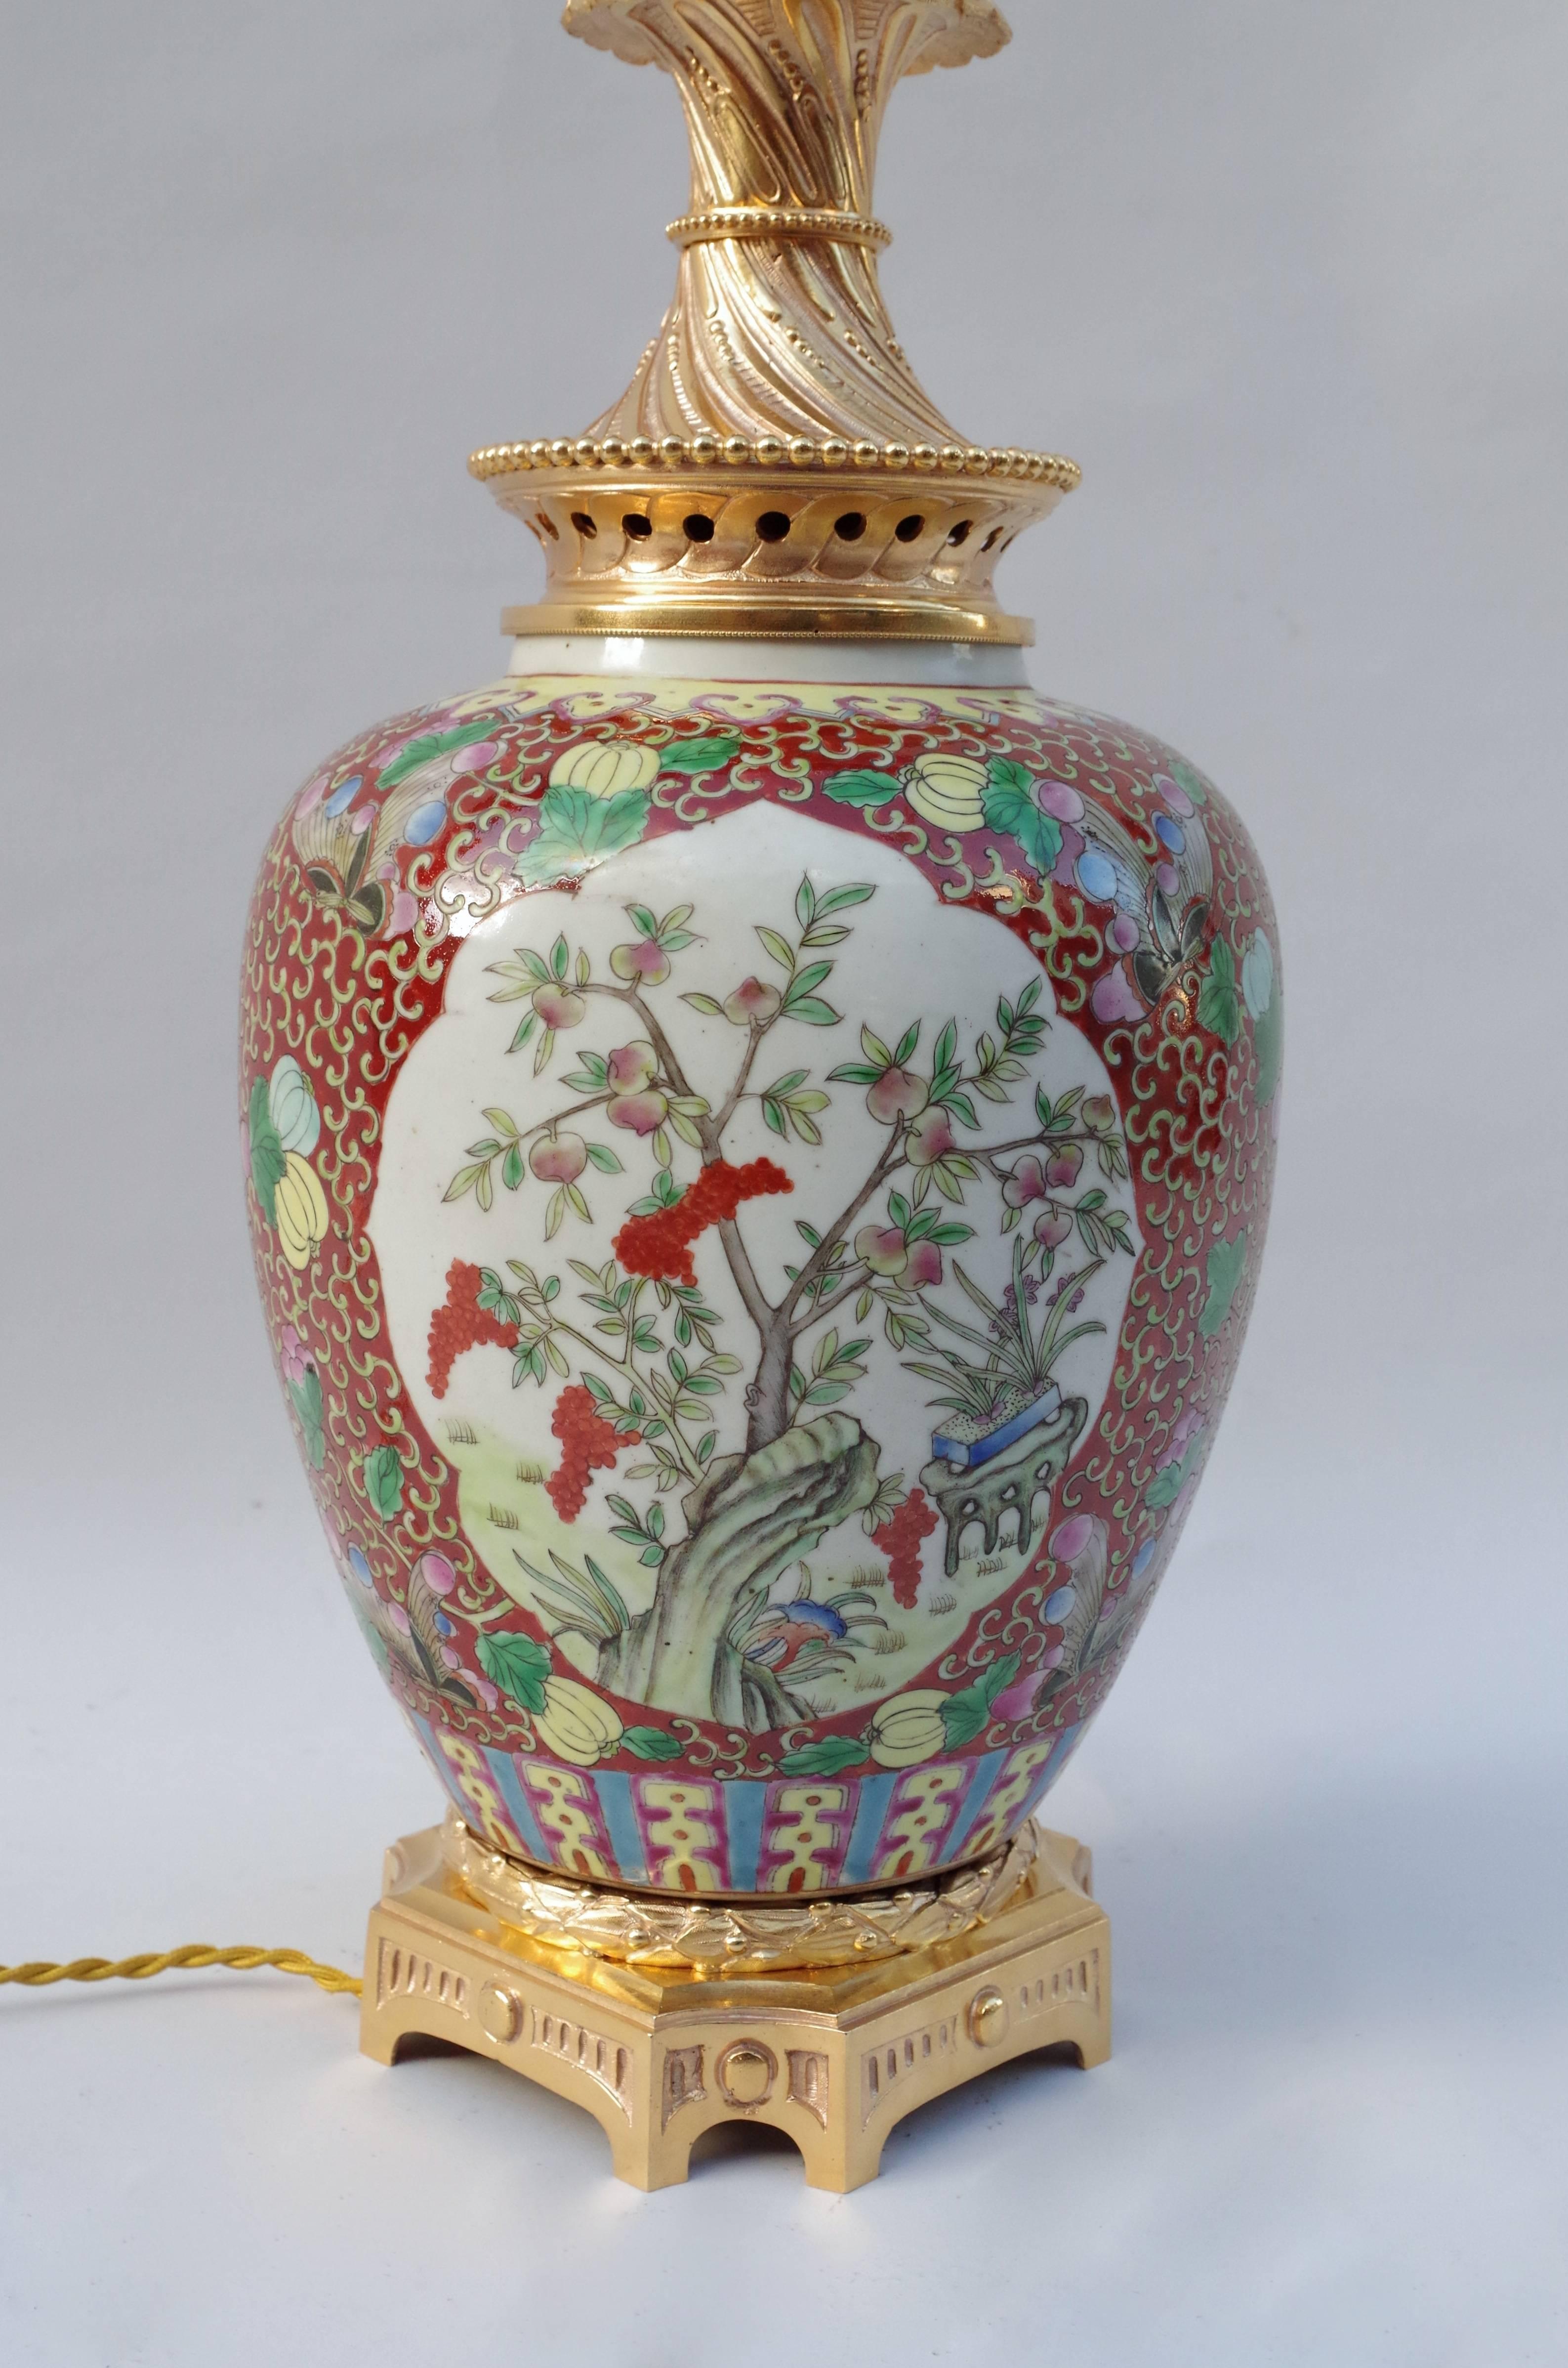 Large vase shaped porcelain lamp.
Green family porcelain on a red background, decorated with interlaces, flowers and butterflies. Plants in reserve in two white background cartouches as Chinese gooseberries, prunus blossoms, carnation and